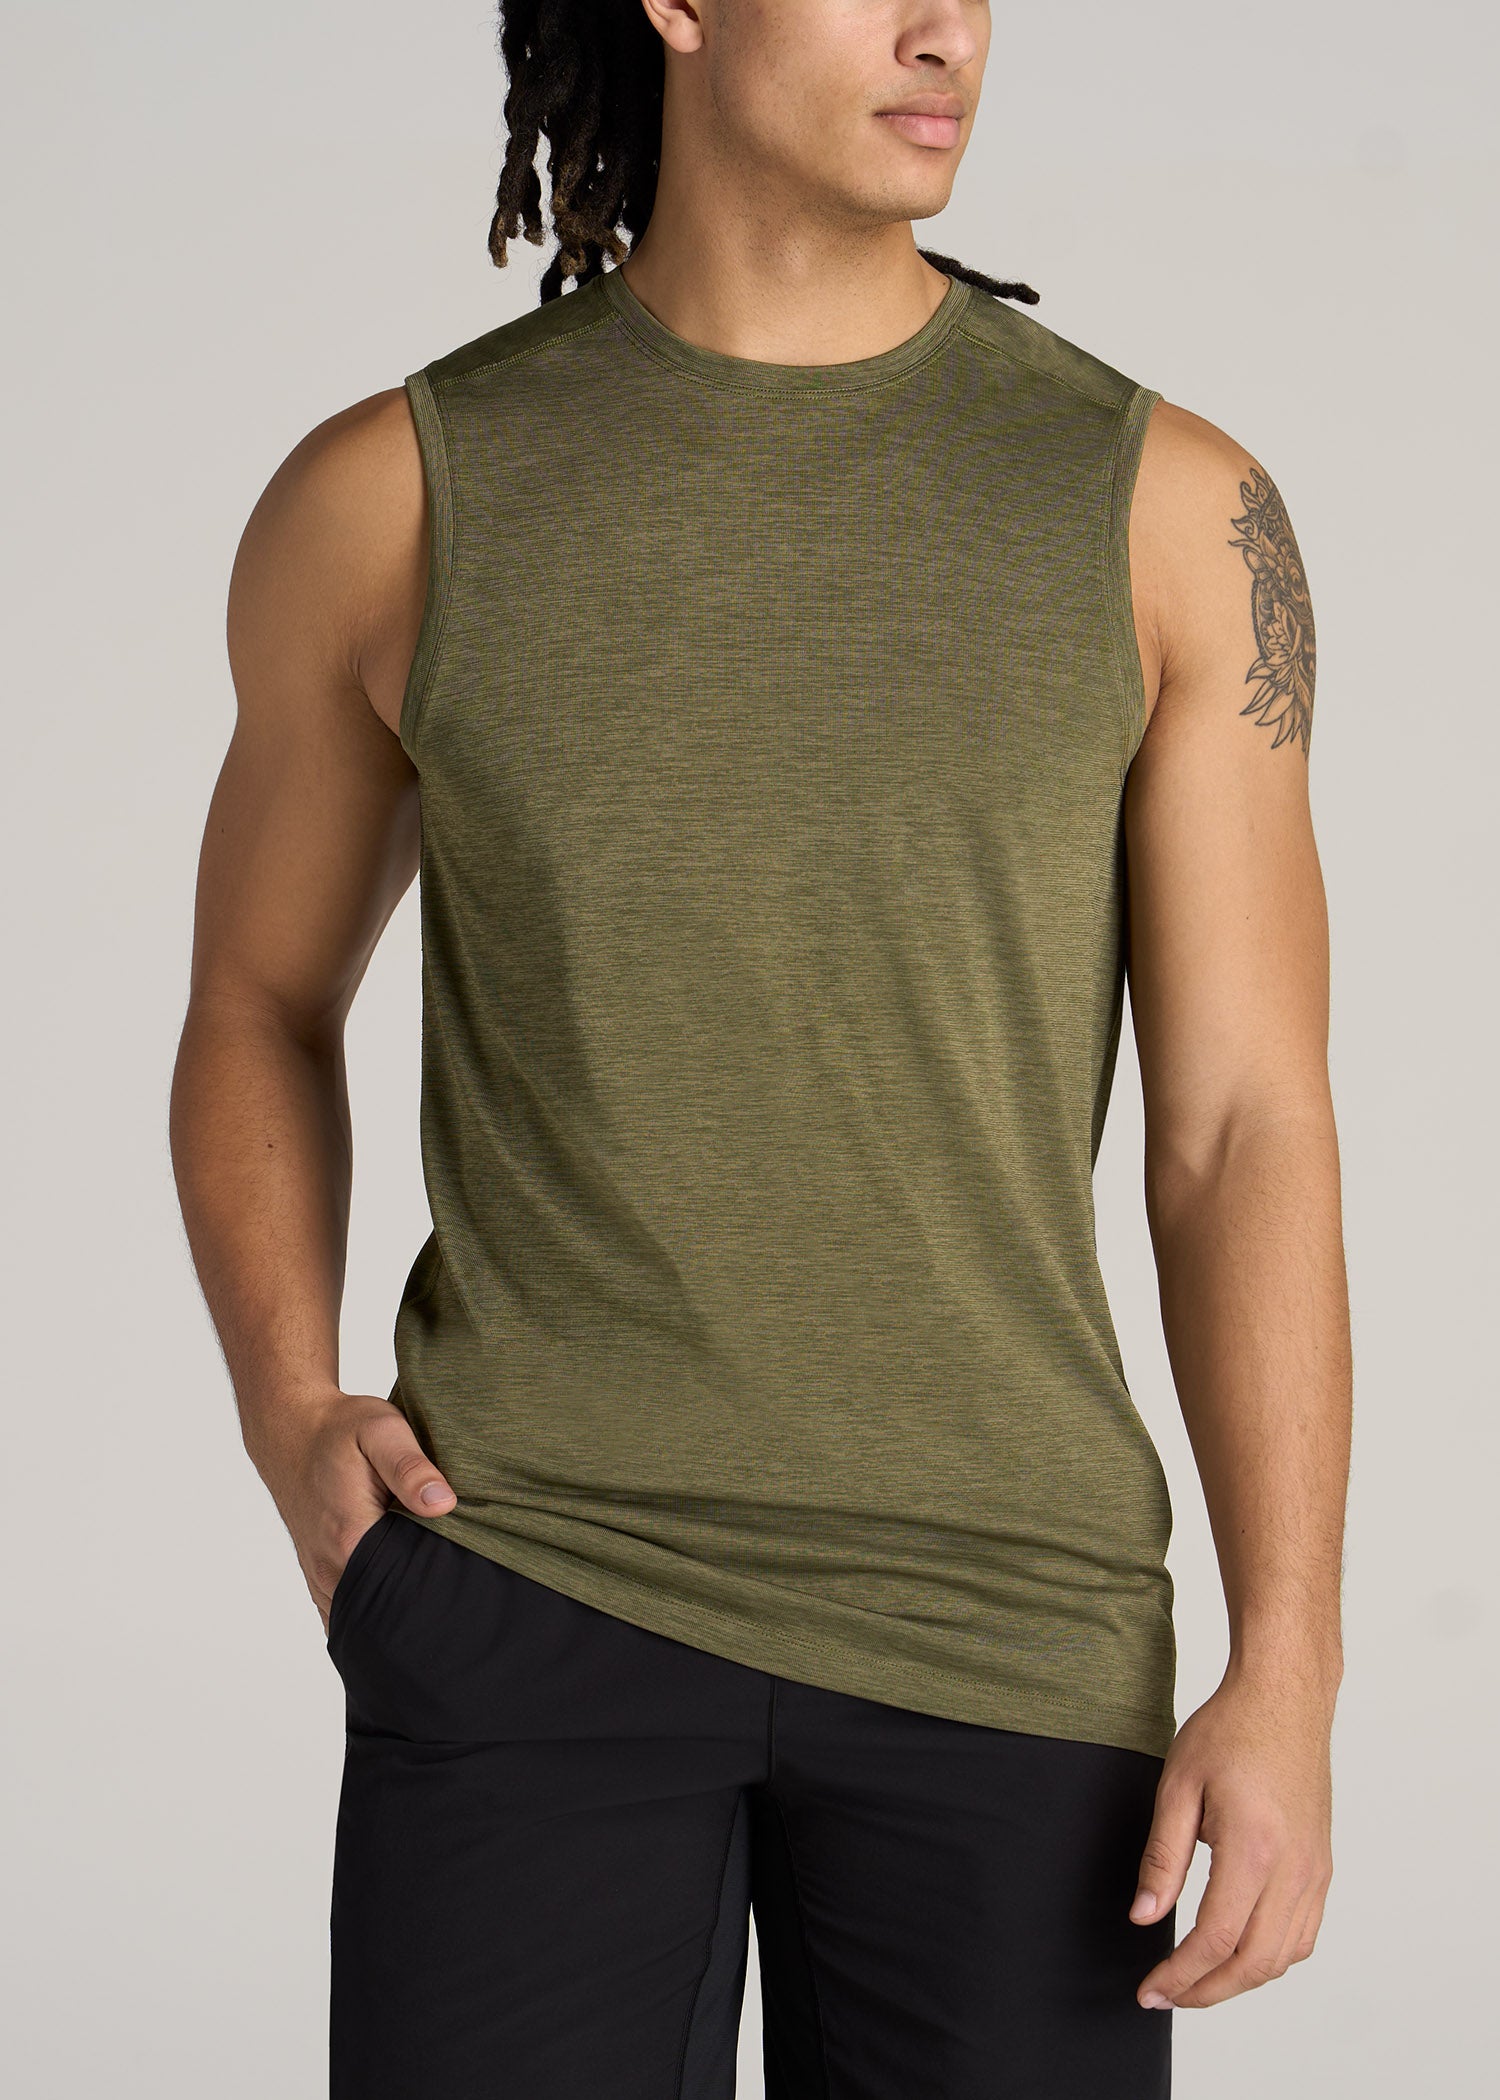 Extra 25% Off for Members: 100s of Styles Added Extended Sizes Training &  Gym Tank Tops.